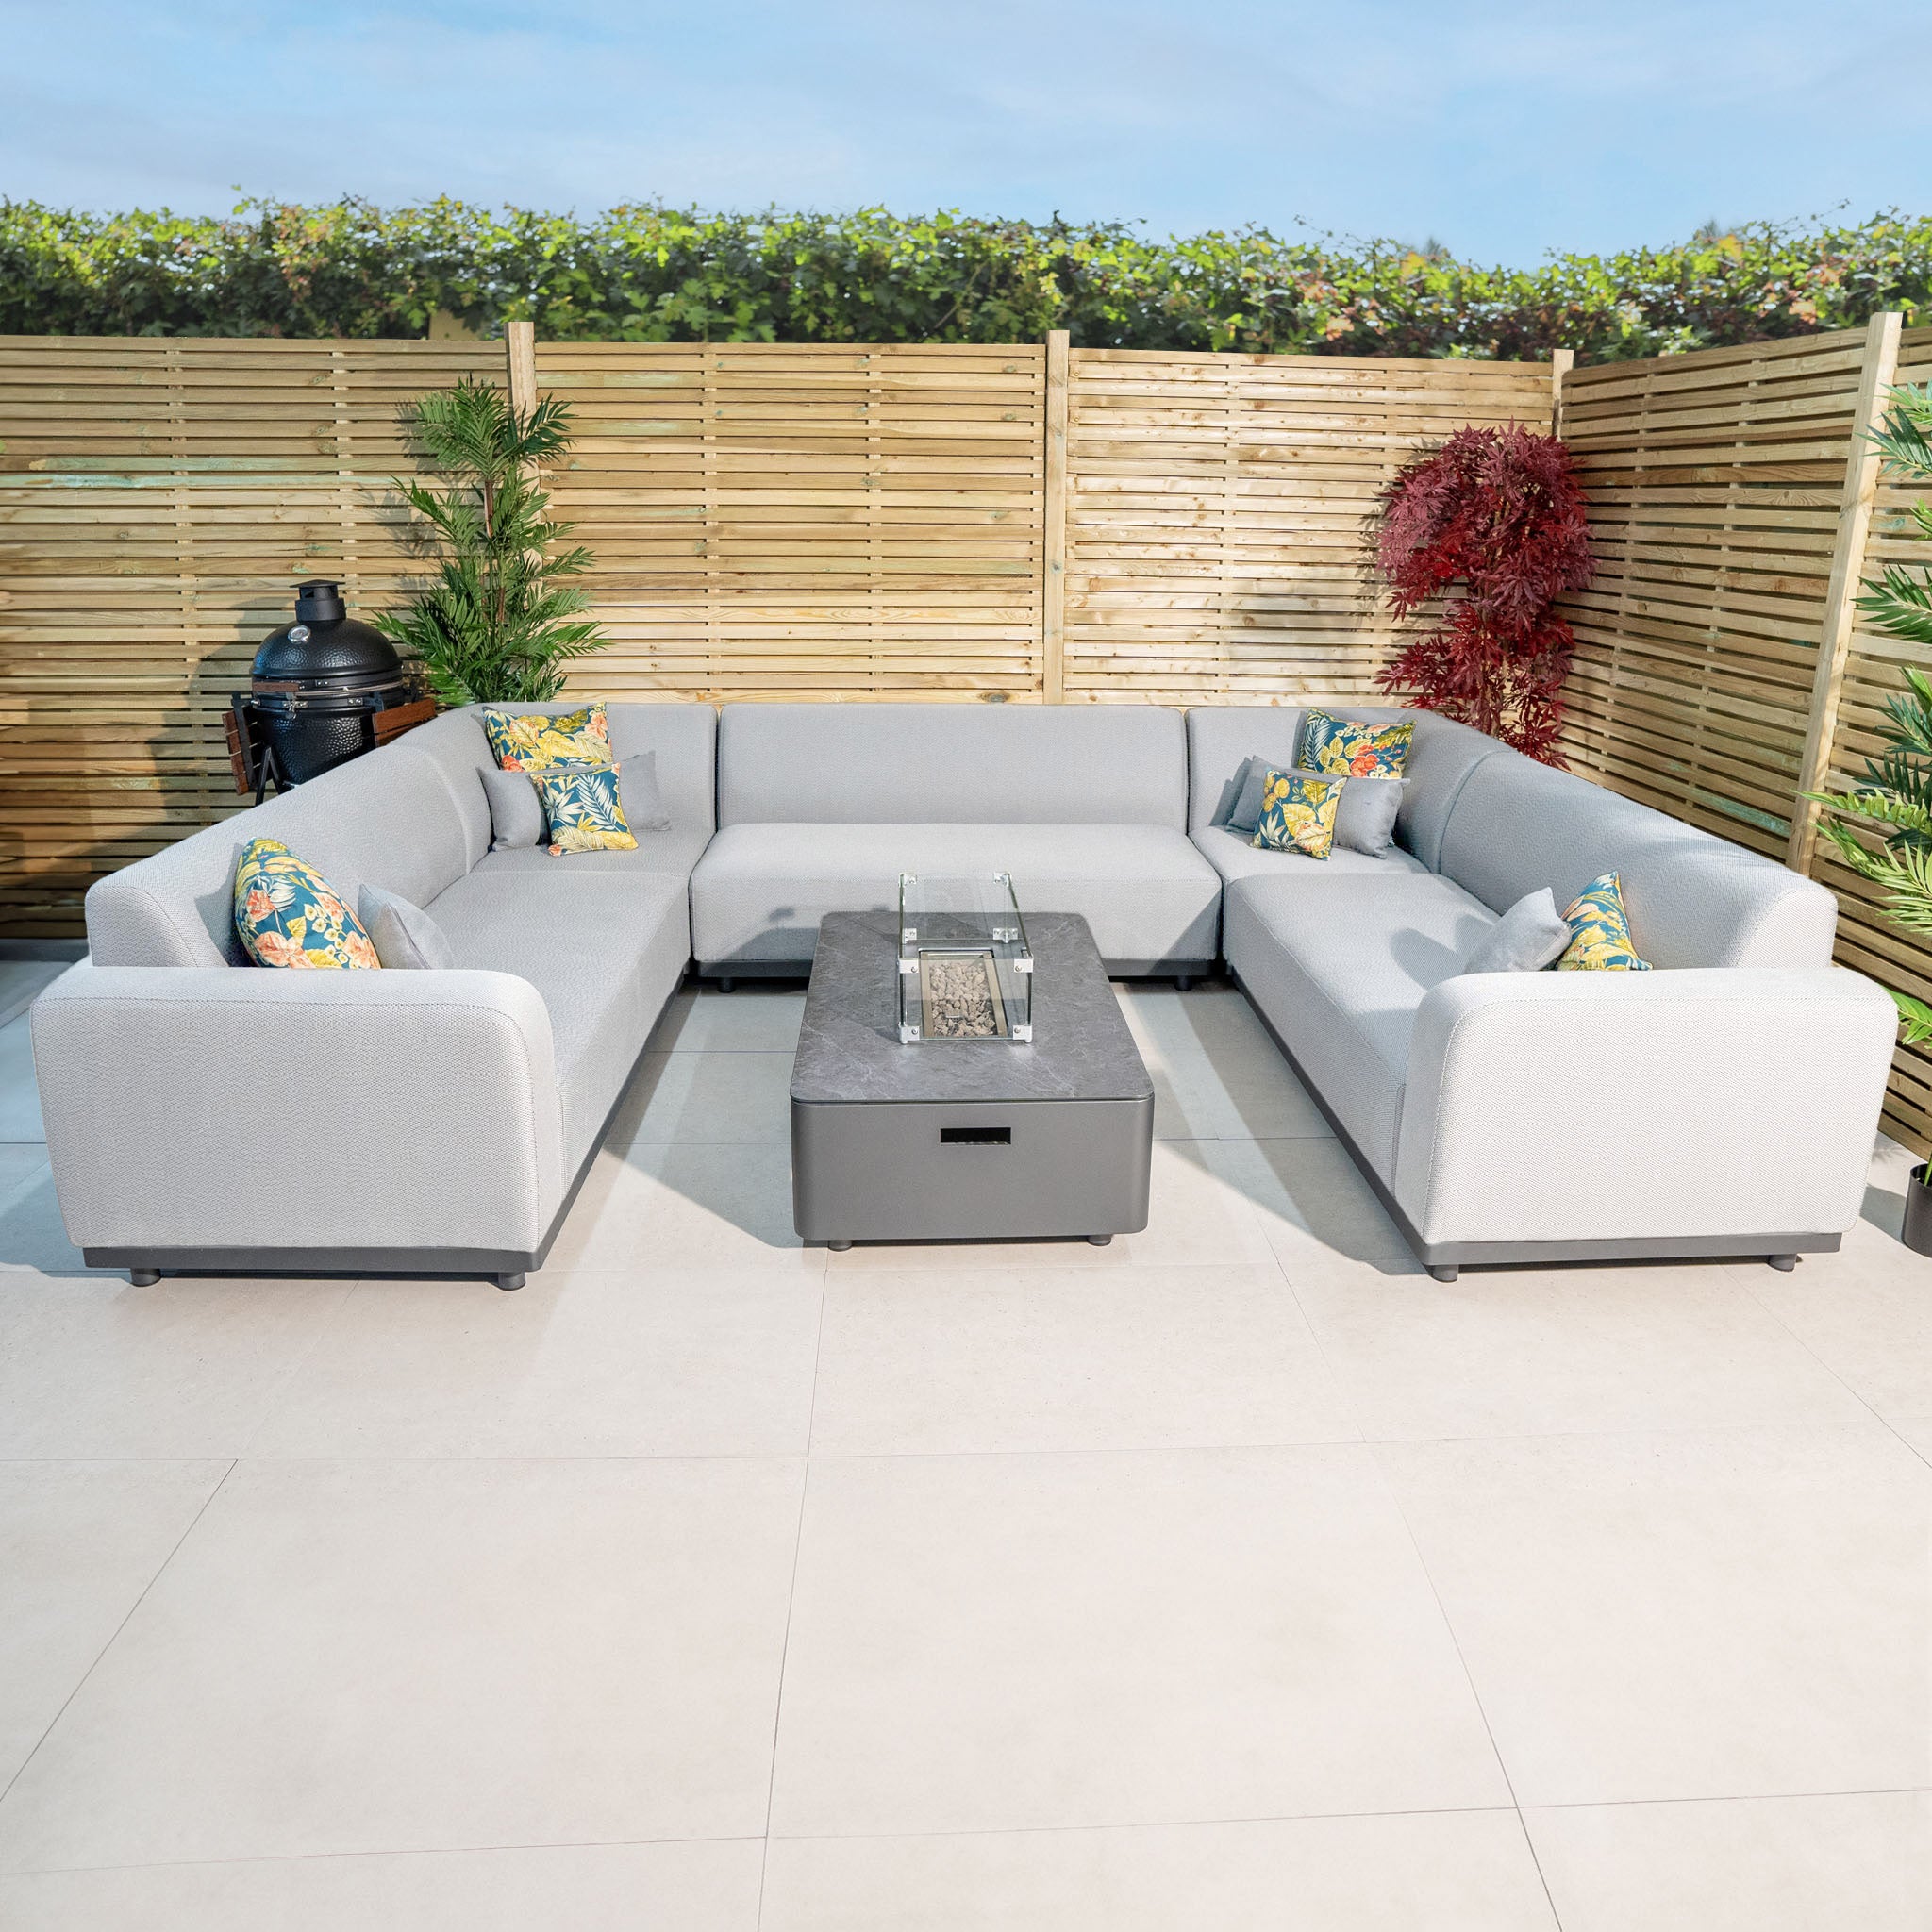 Luna U-Shape Outdoor Fabric Sofa Set with Firepit Coffee Table in Oyster Grey